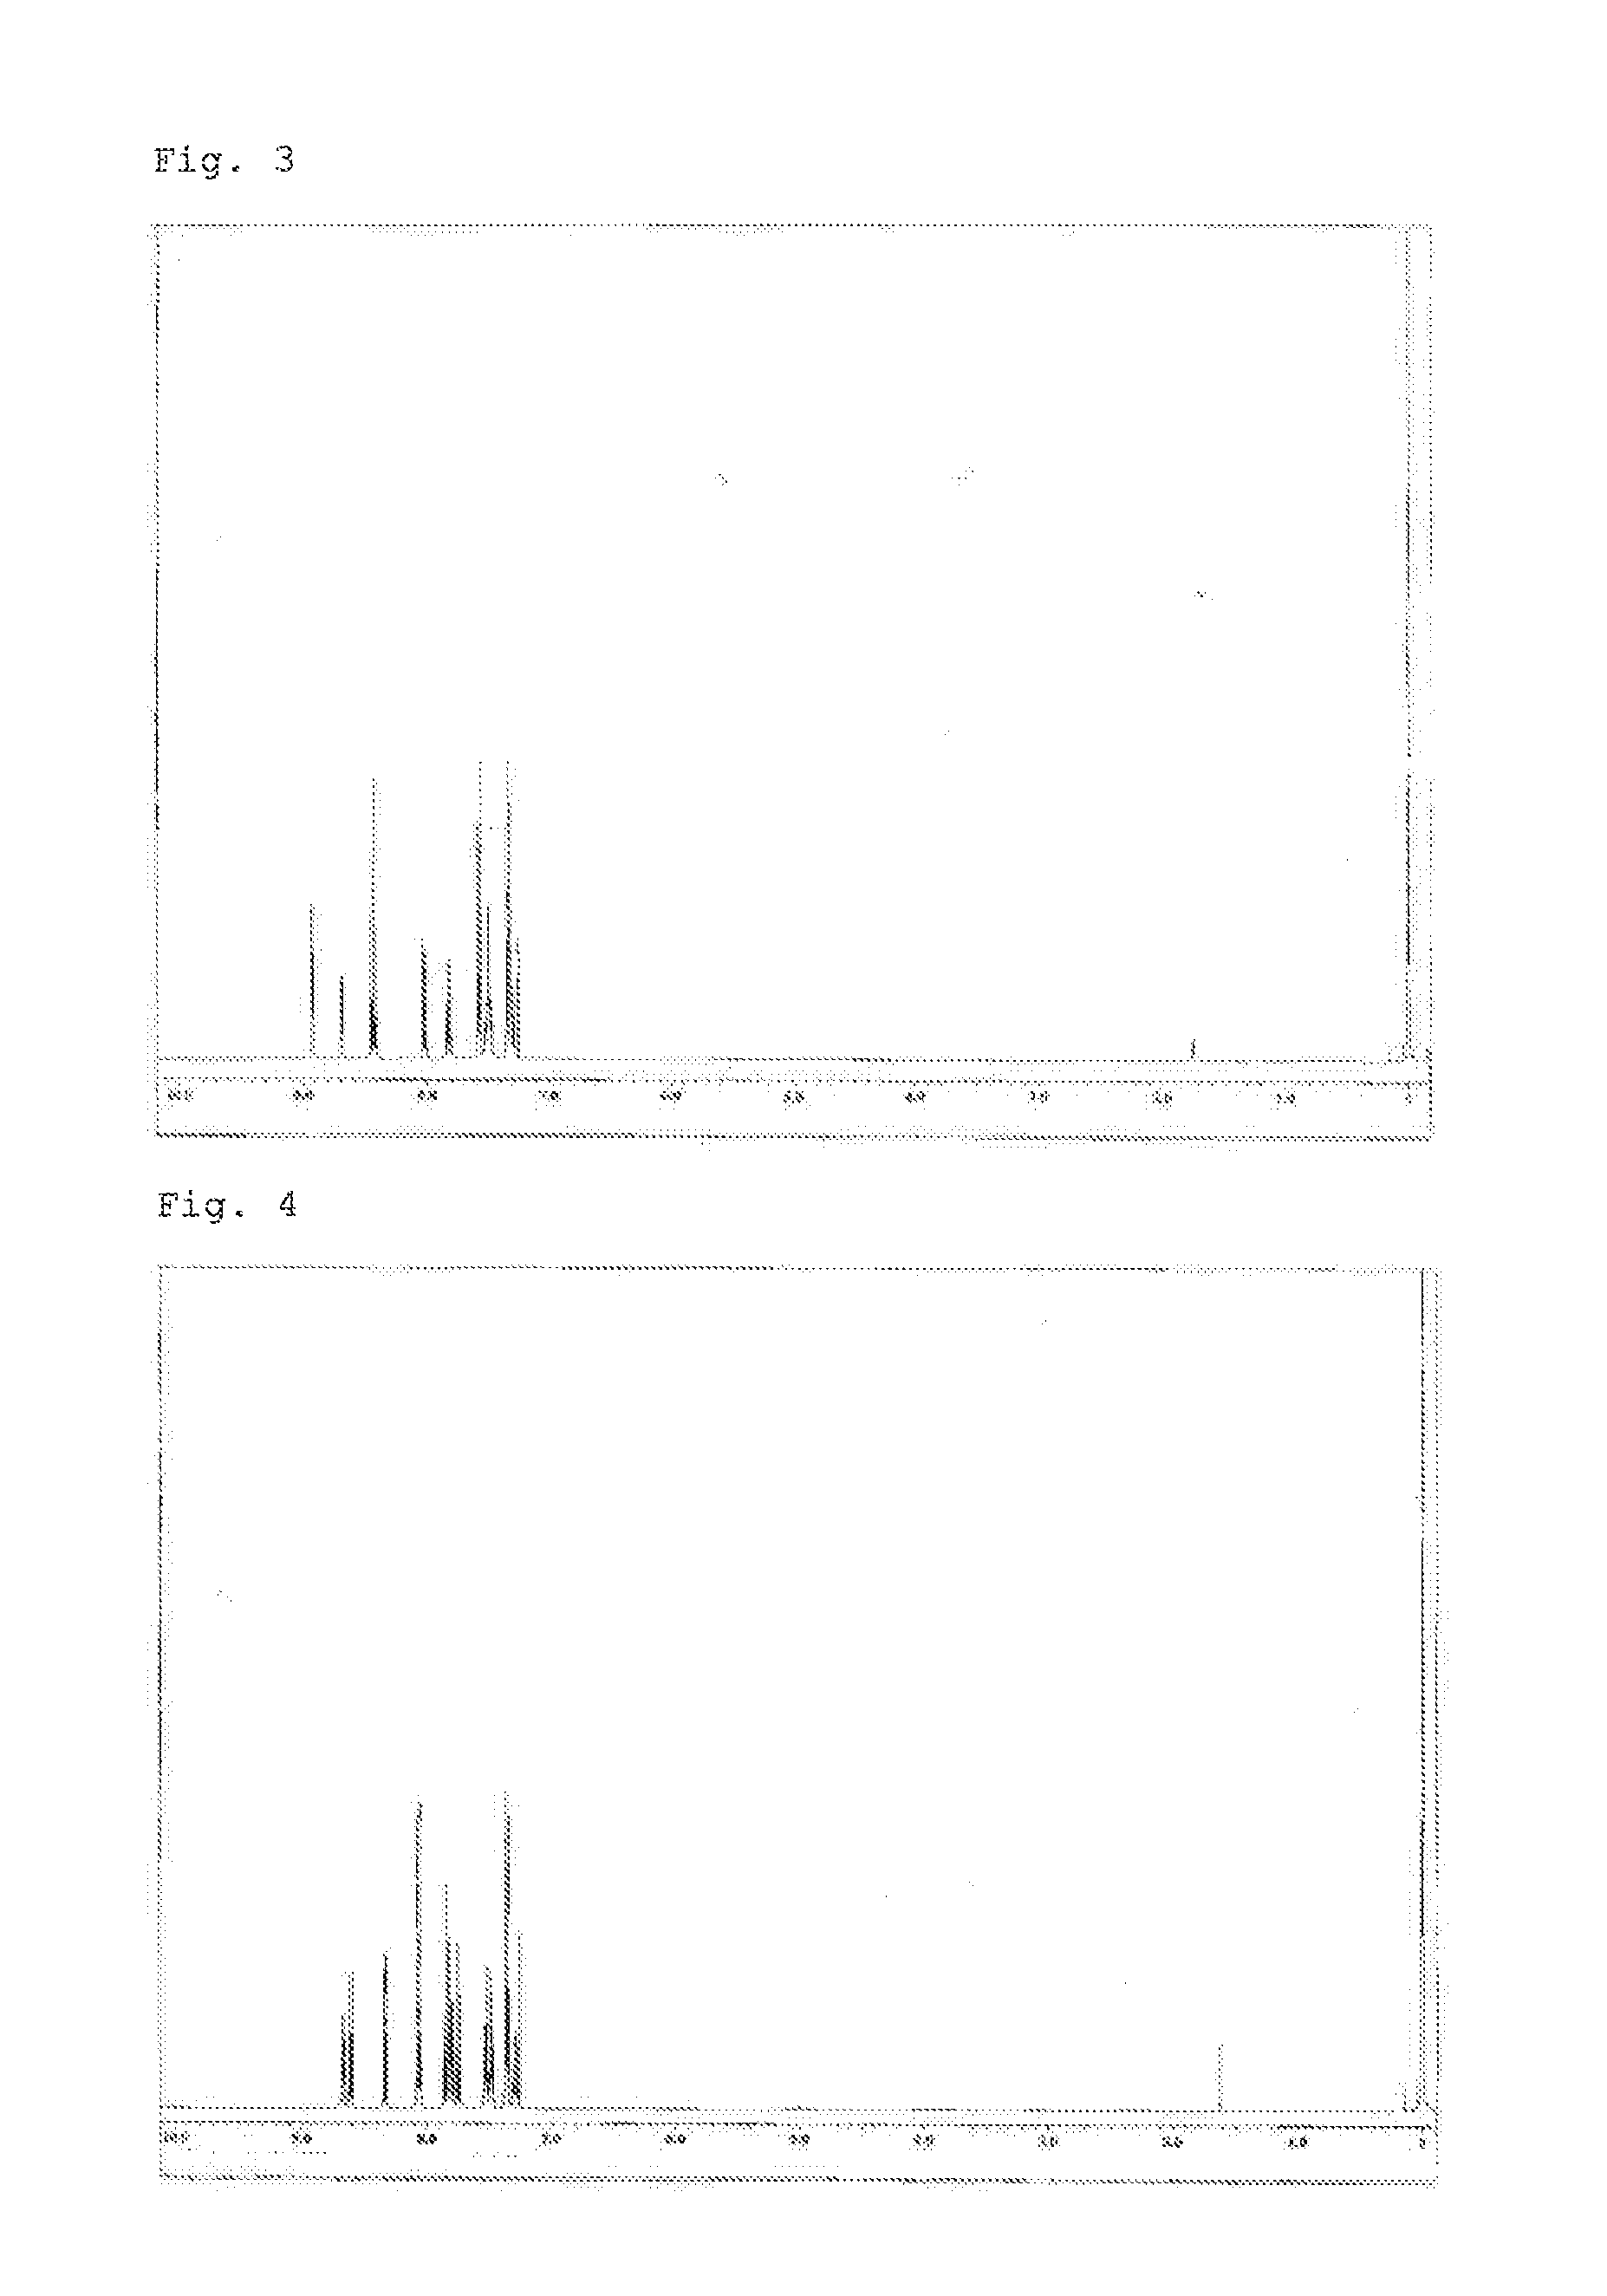 Compound having substituted ortho-terphenyl structure, and organic electroluminescent device